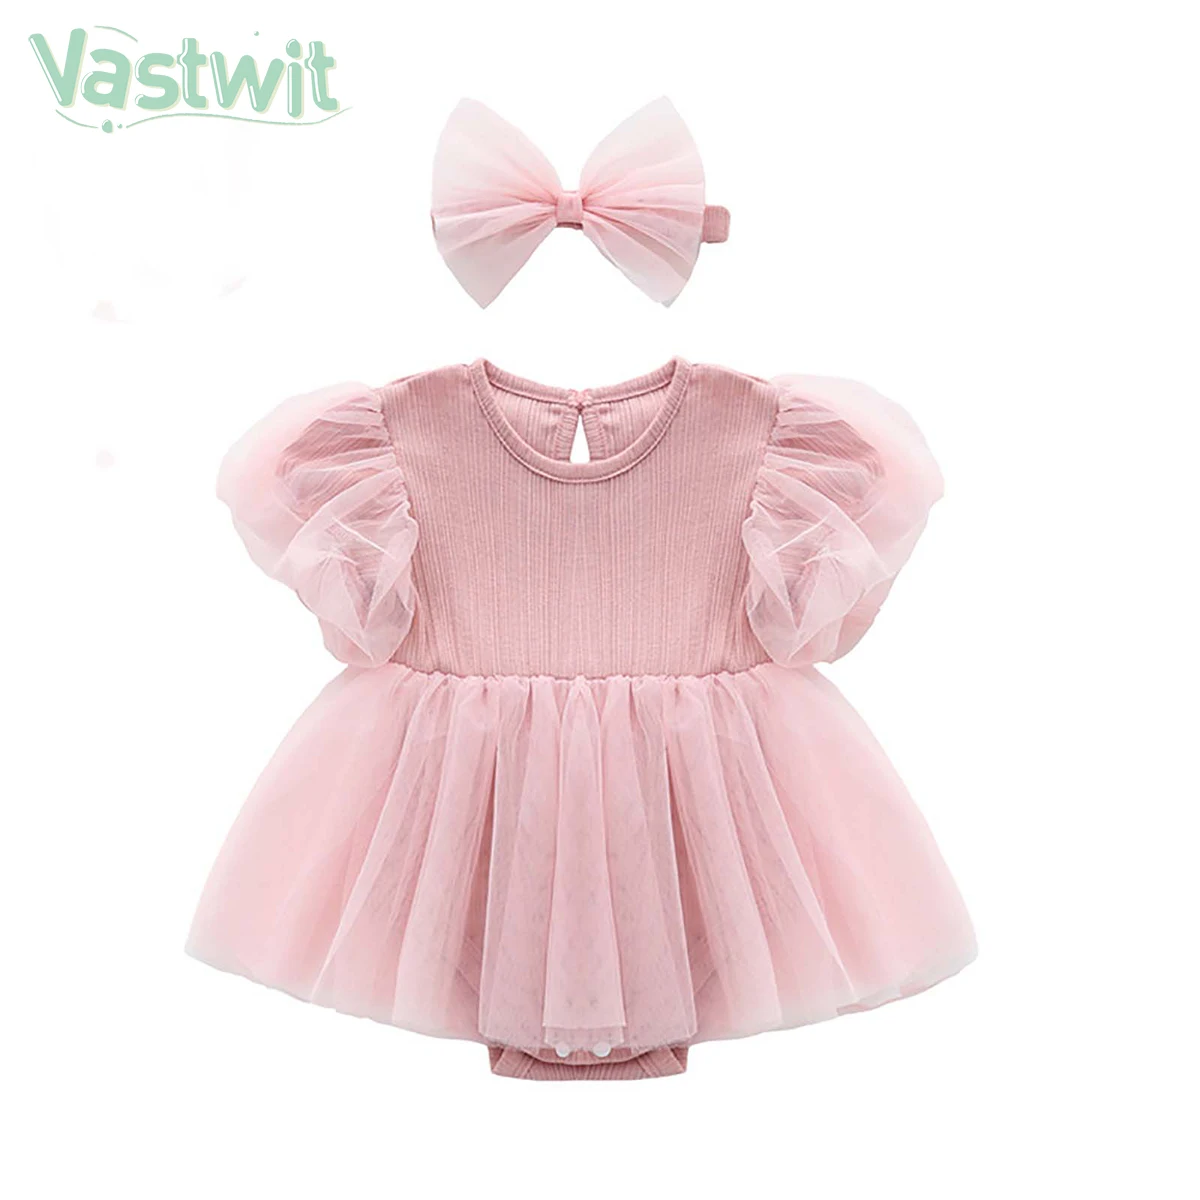 

Newborn Clothes Infant Dresses For Baby Girl Wedding Party Princess Tulle Dress 1st Year Birthday Mesh Tutu Baptism Dress 0-12M